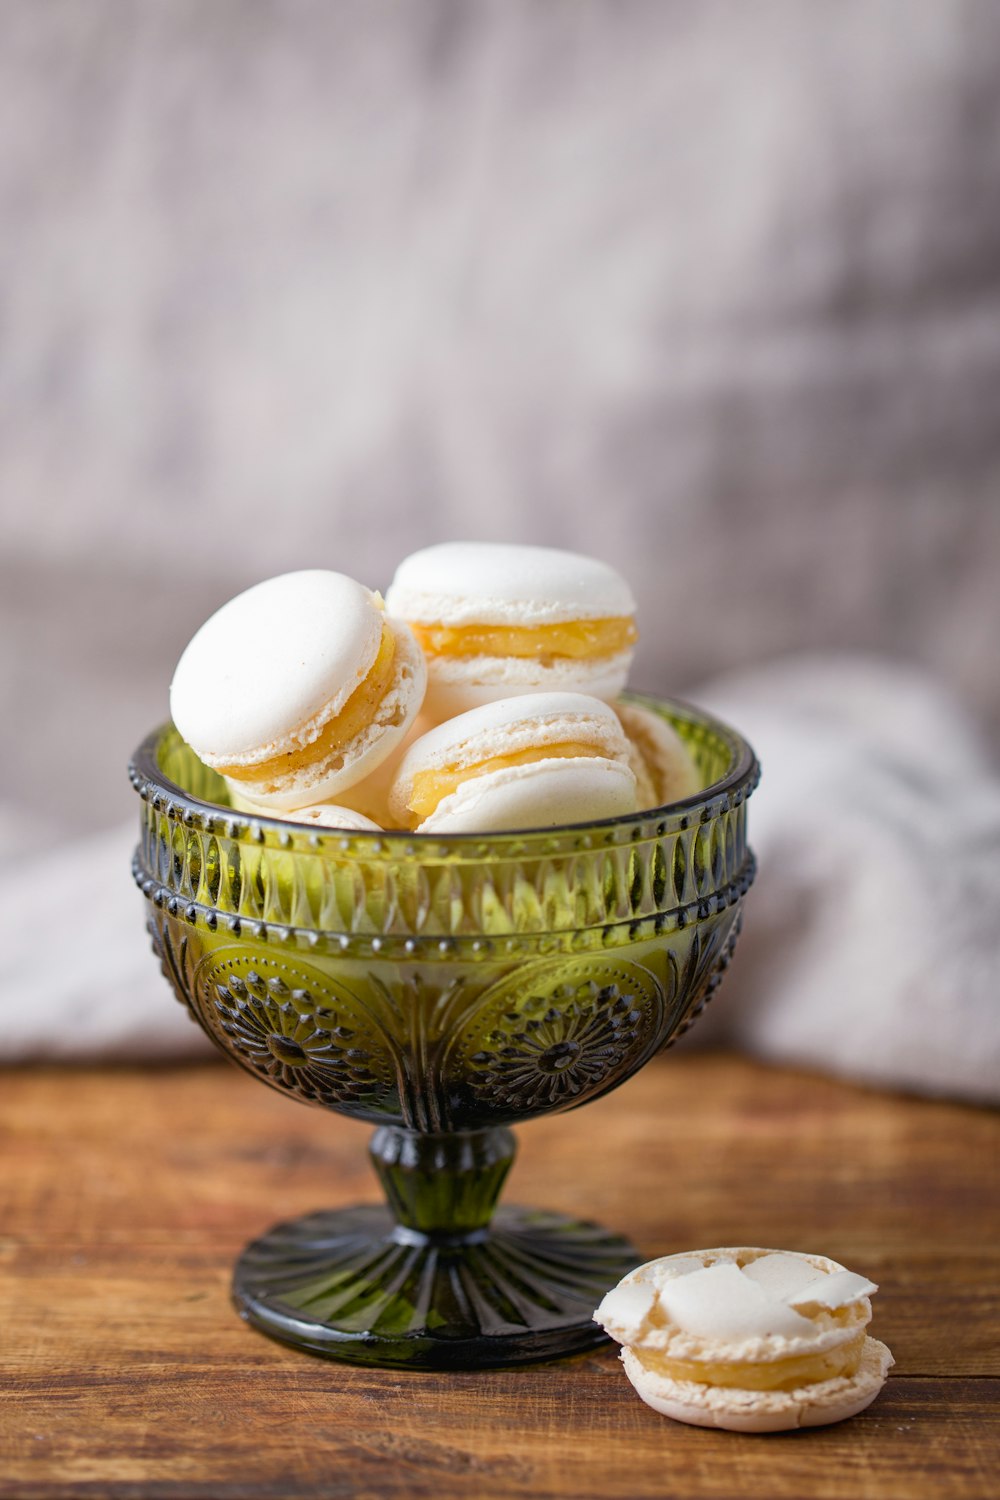 yellow and white ceramic bowl with white and brown pastry